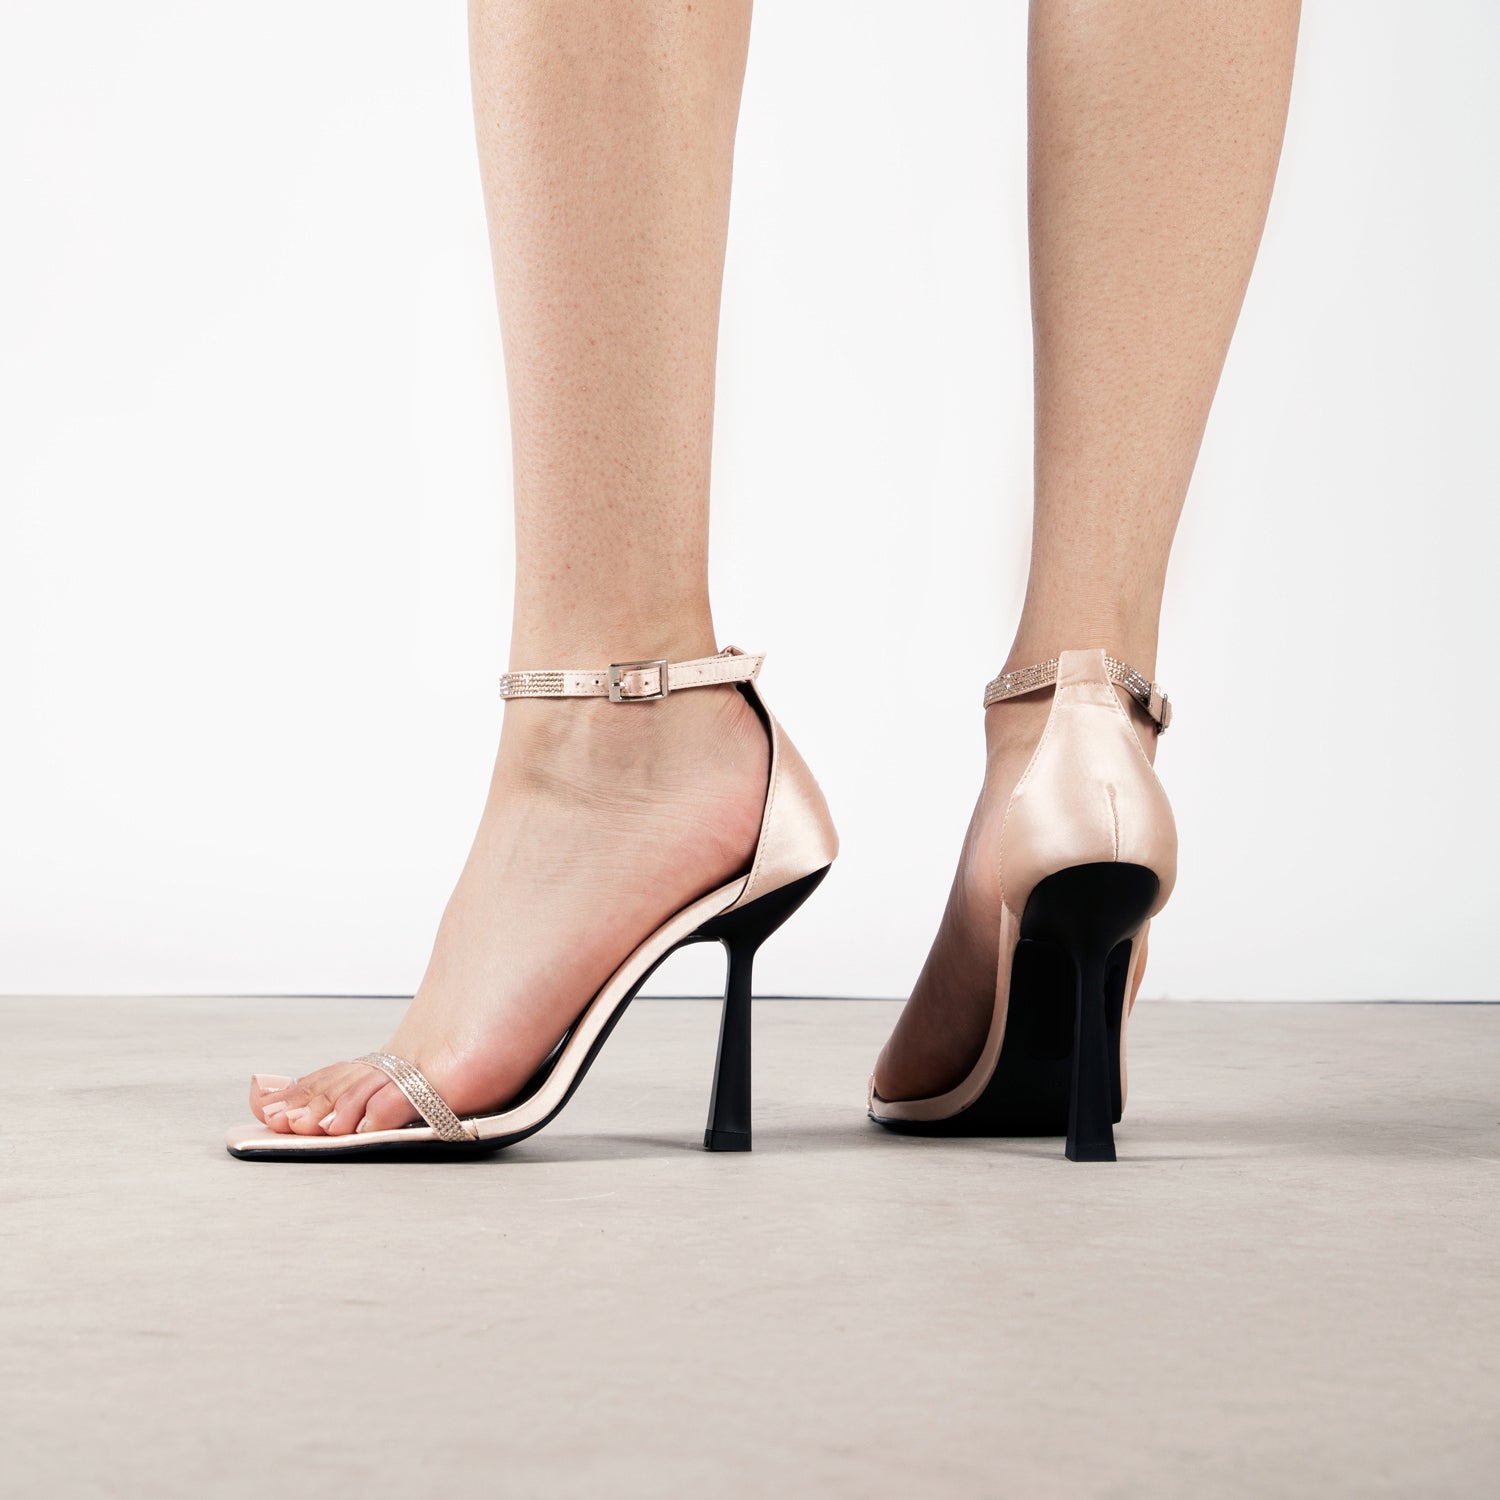 BEBO Cassidy Heeled Sandal in Champagne Satin